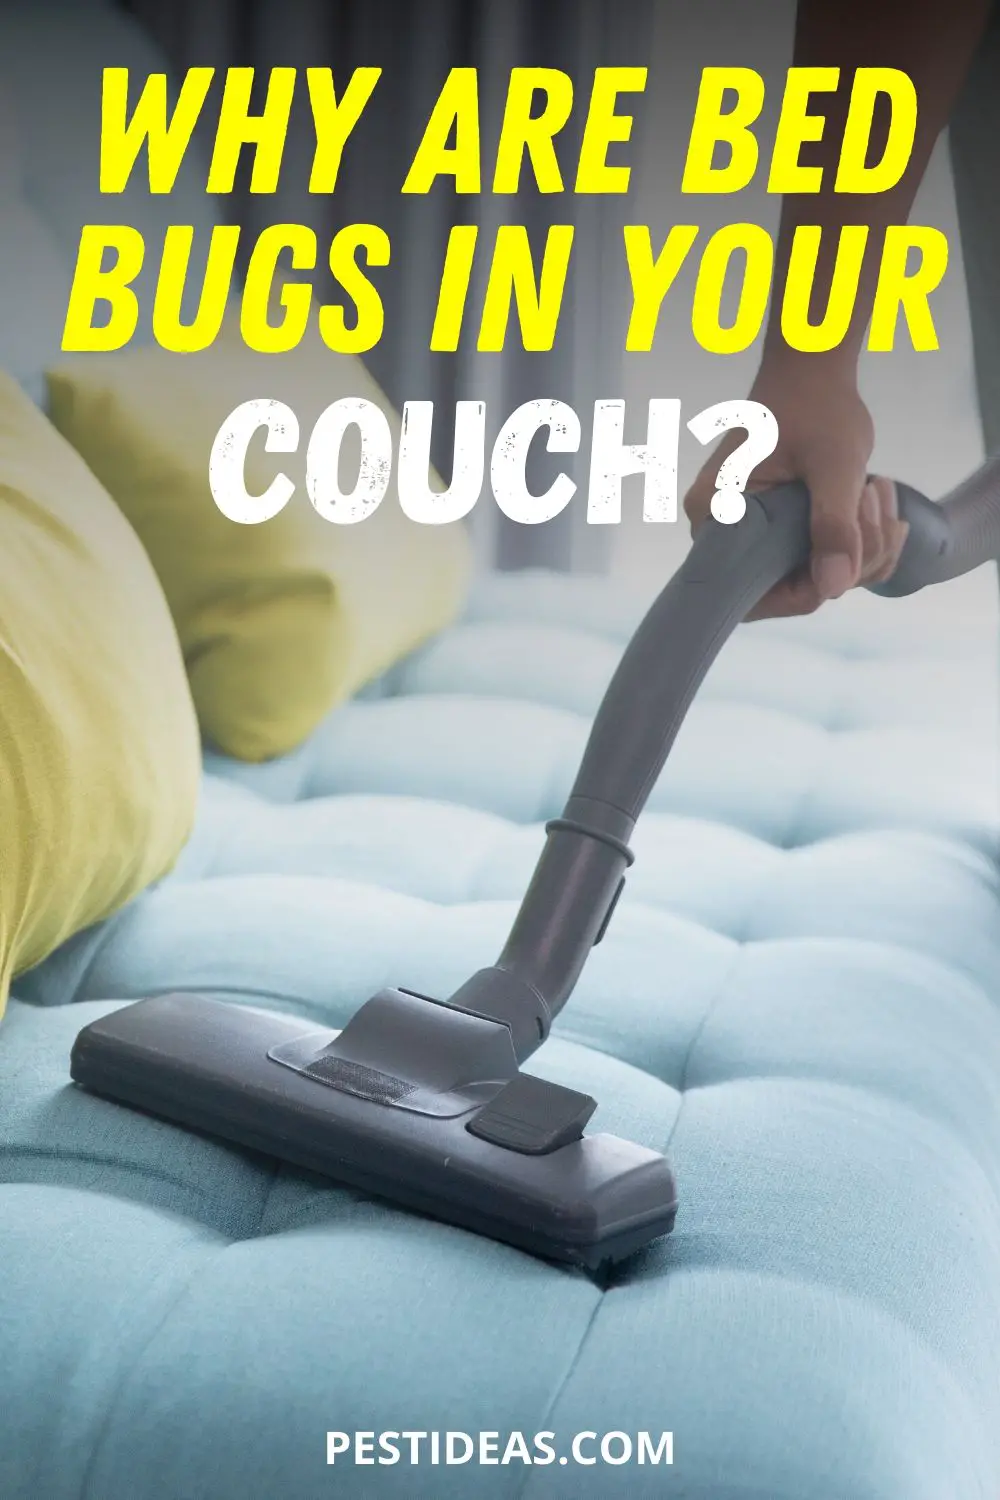 Get Rid of Bed Bugs in Your Couch- Get Rid of Bed Bugs Fast